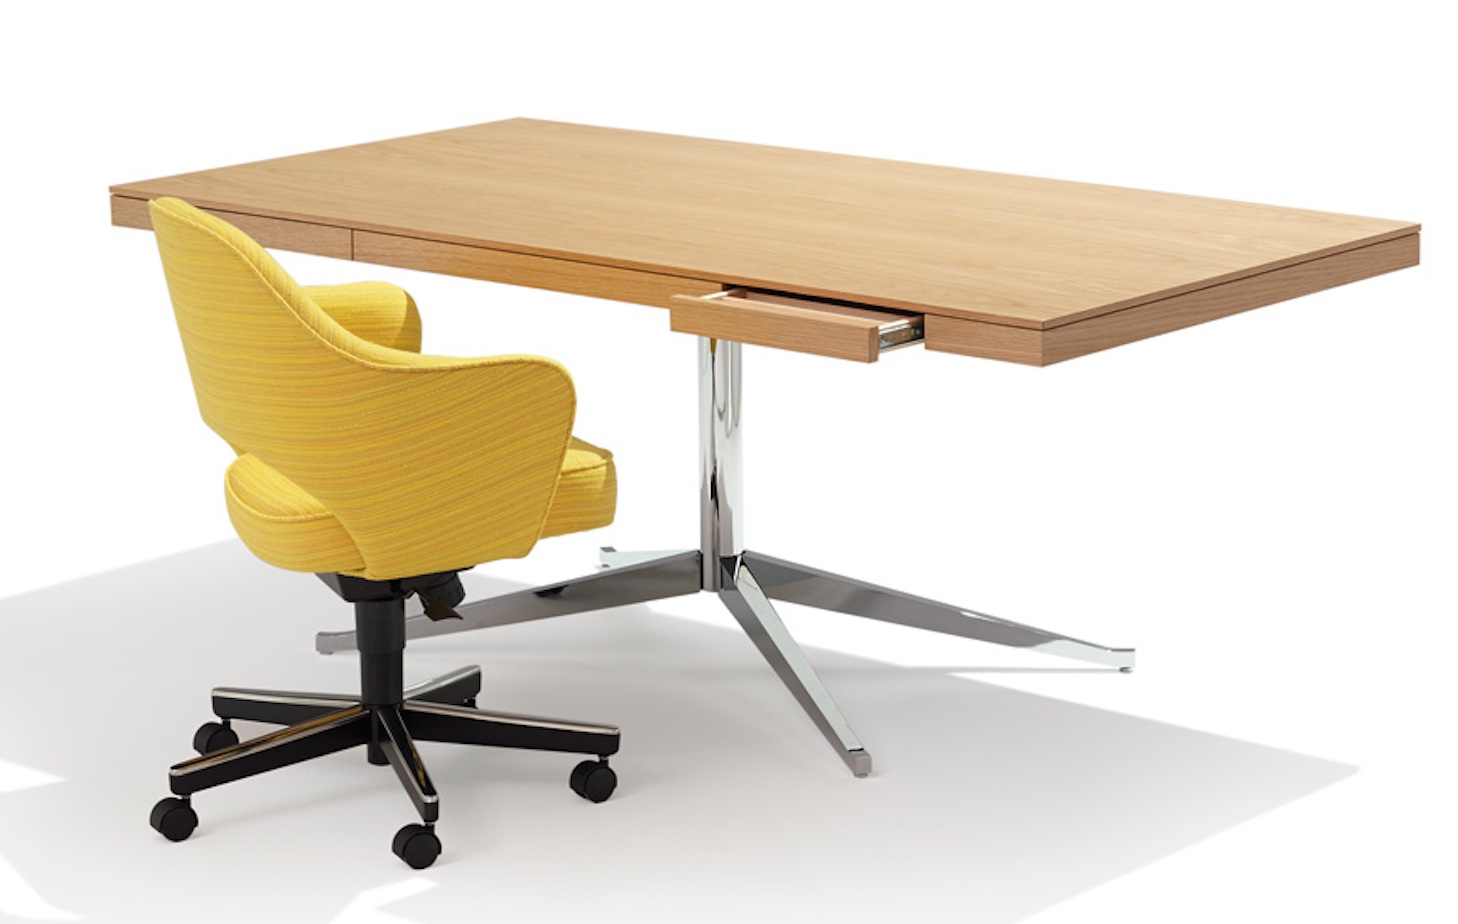 Knoll Executive: A Desk Ahead of Its Time